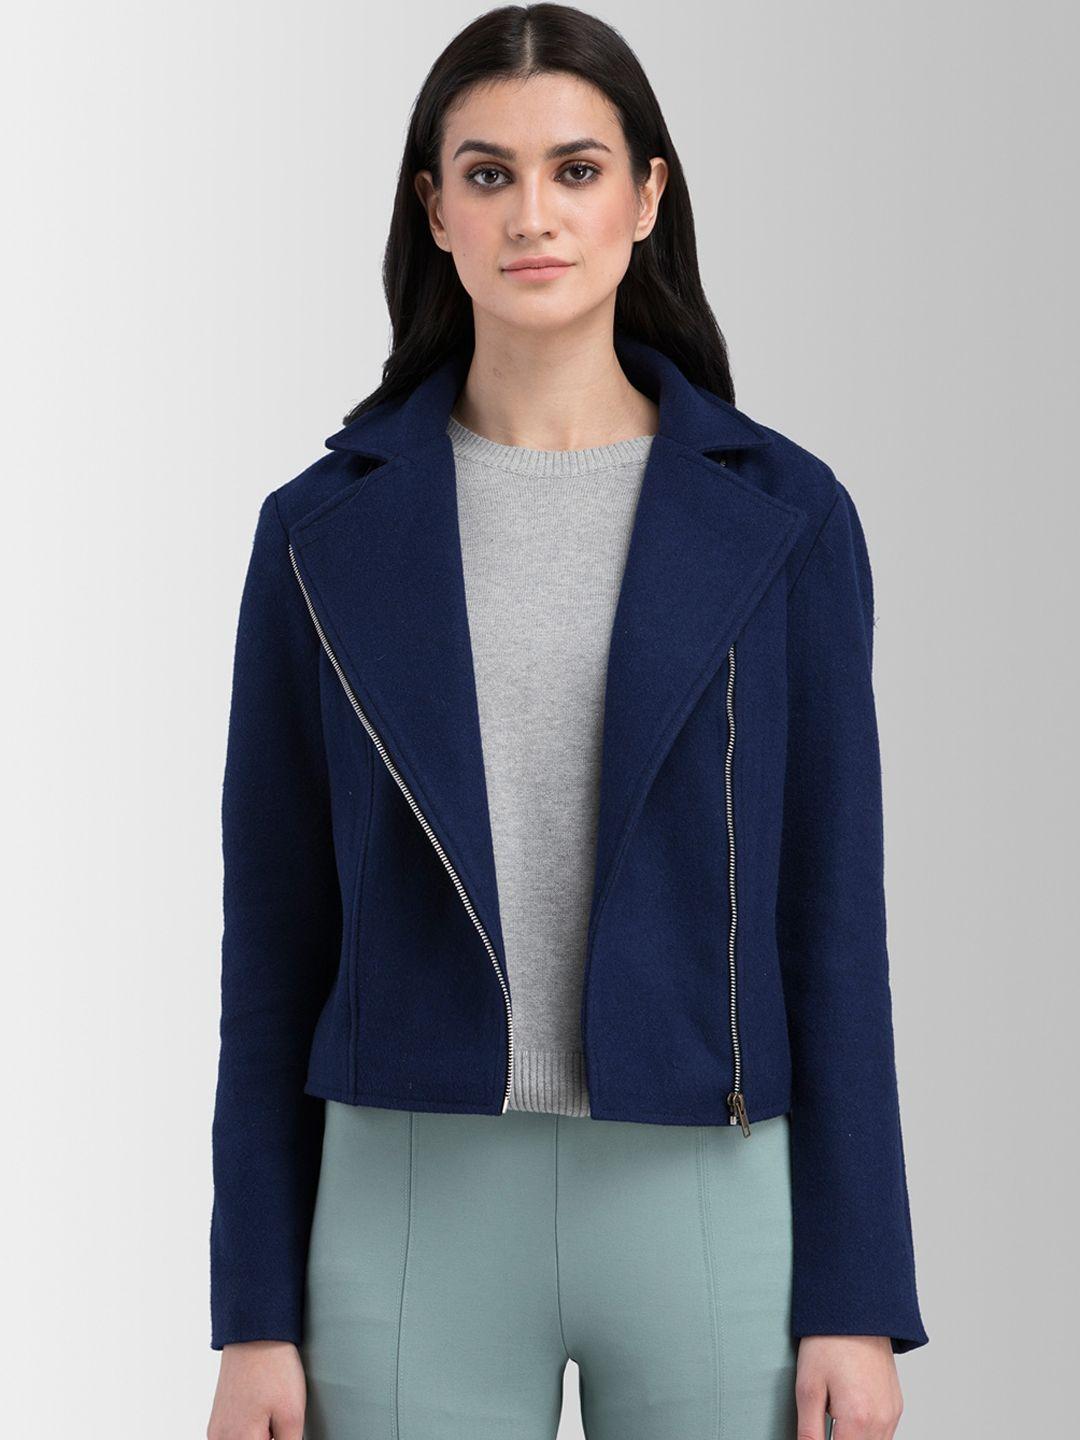 fablestreet-women-navy-blue-solid-tailored-jacket